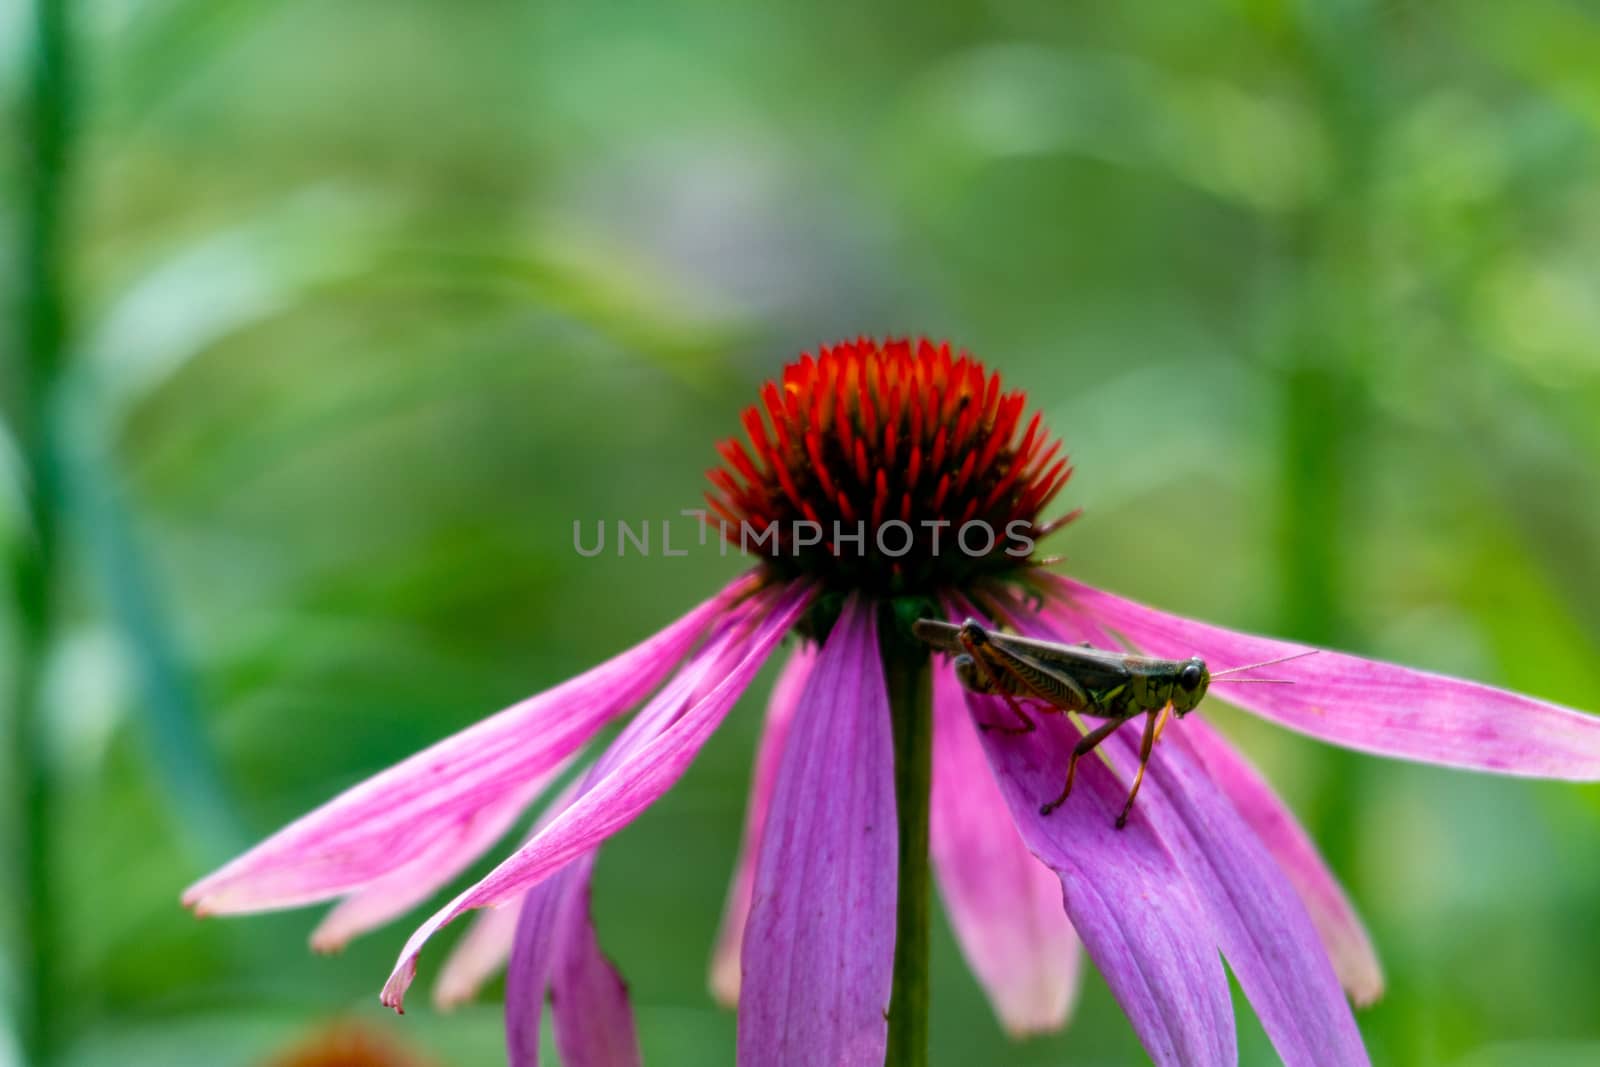 Grasshopper on coneflower. Cute red-legged grasshopper resting on top of a cone flower, beautiful shades of pink, purple, orange and green, great nature or